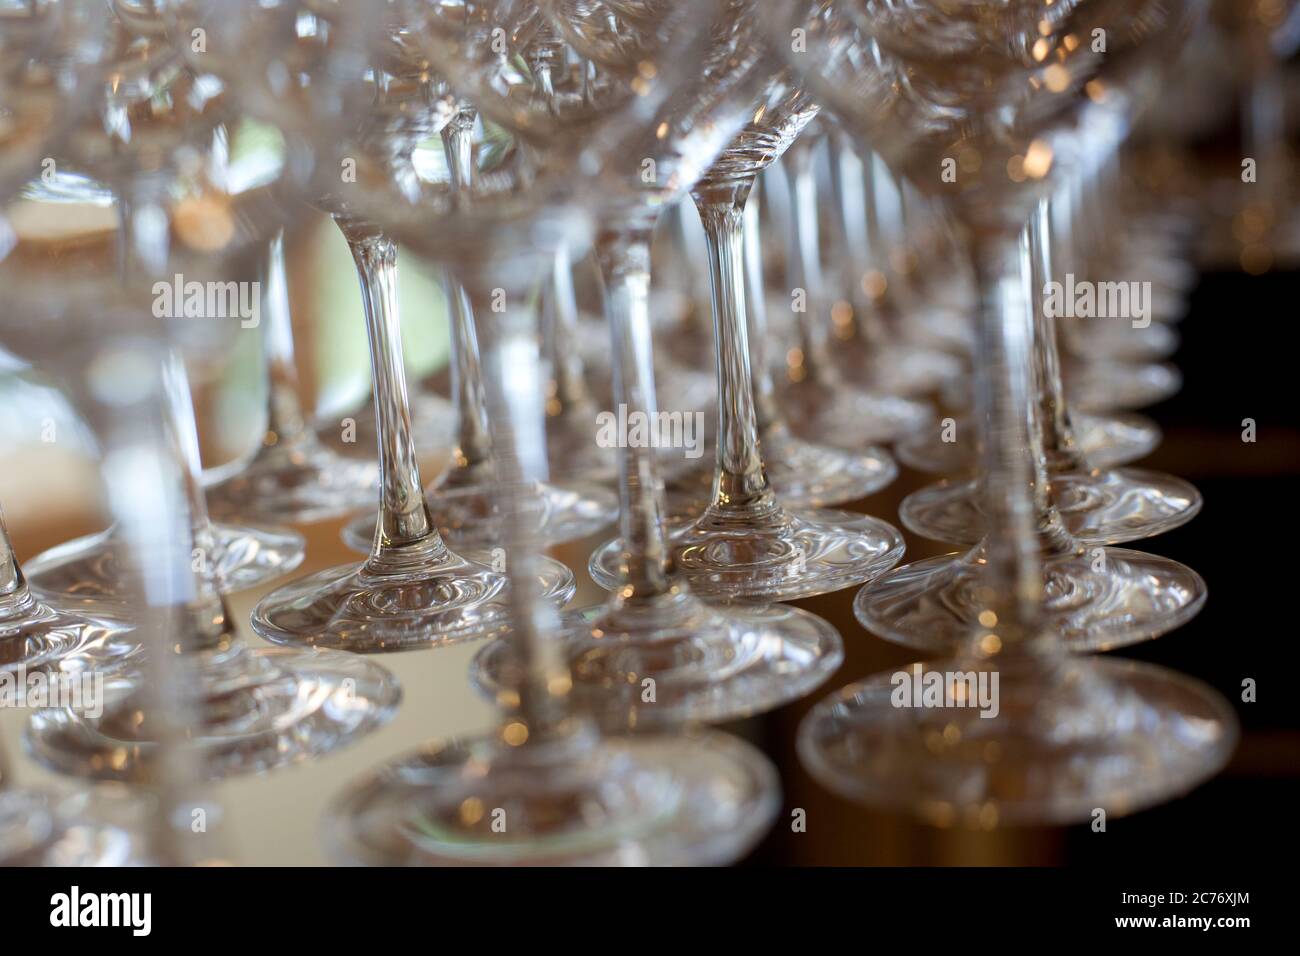 Still life of a lineup of elegant wine glasses Stock Photo